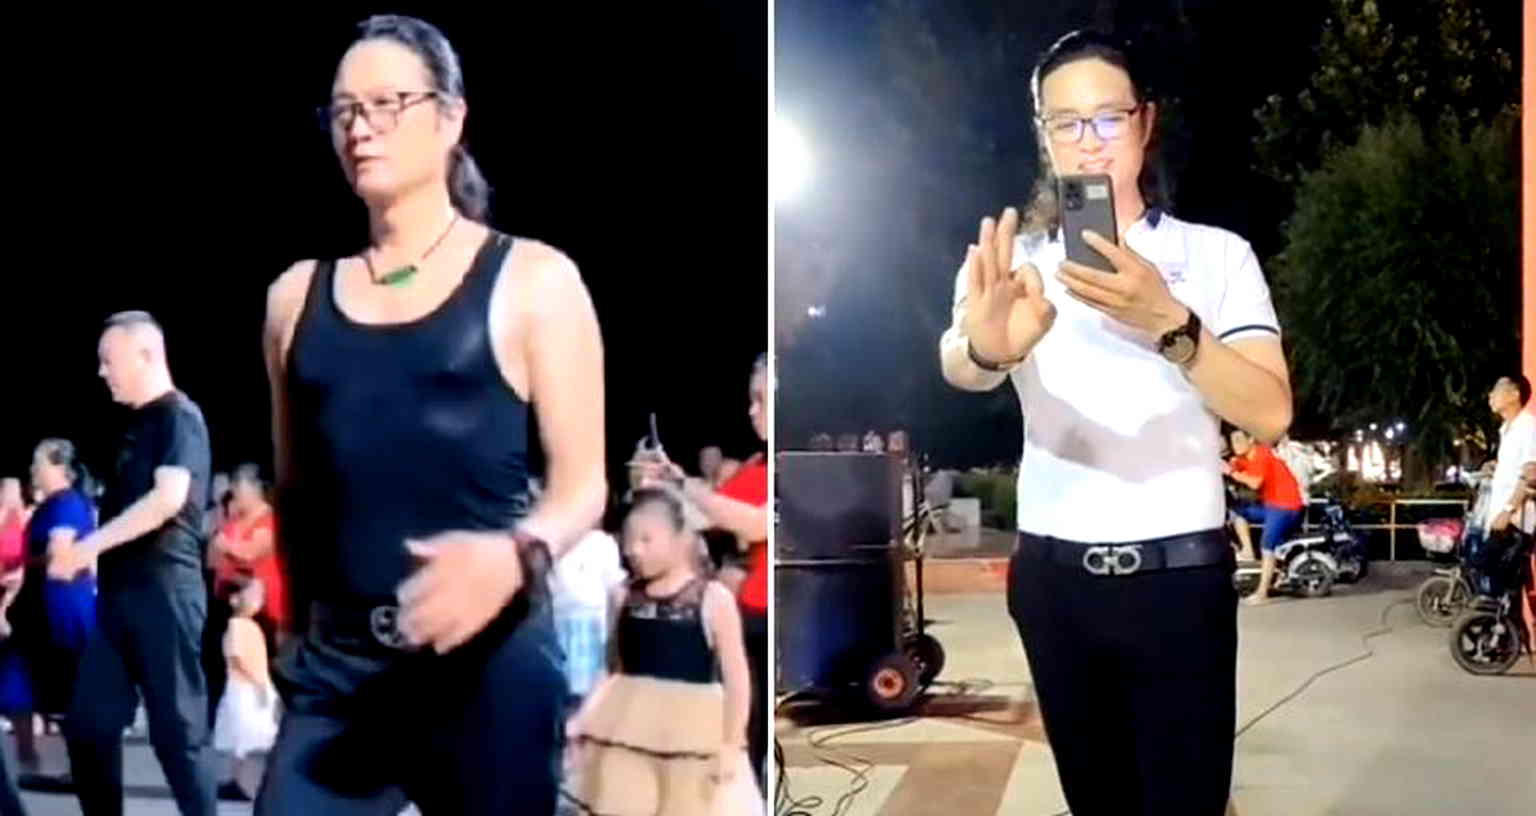 ‘Chinese Master of the Square Dance’ becomes online sensation after videos reach TikTok